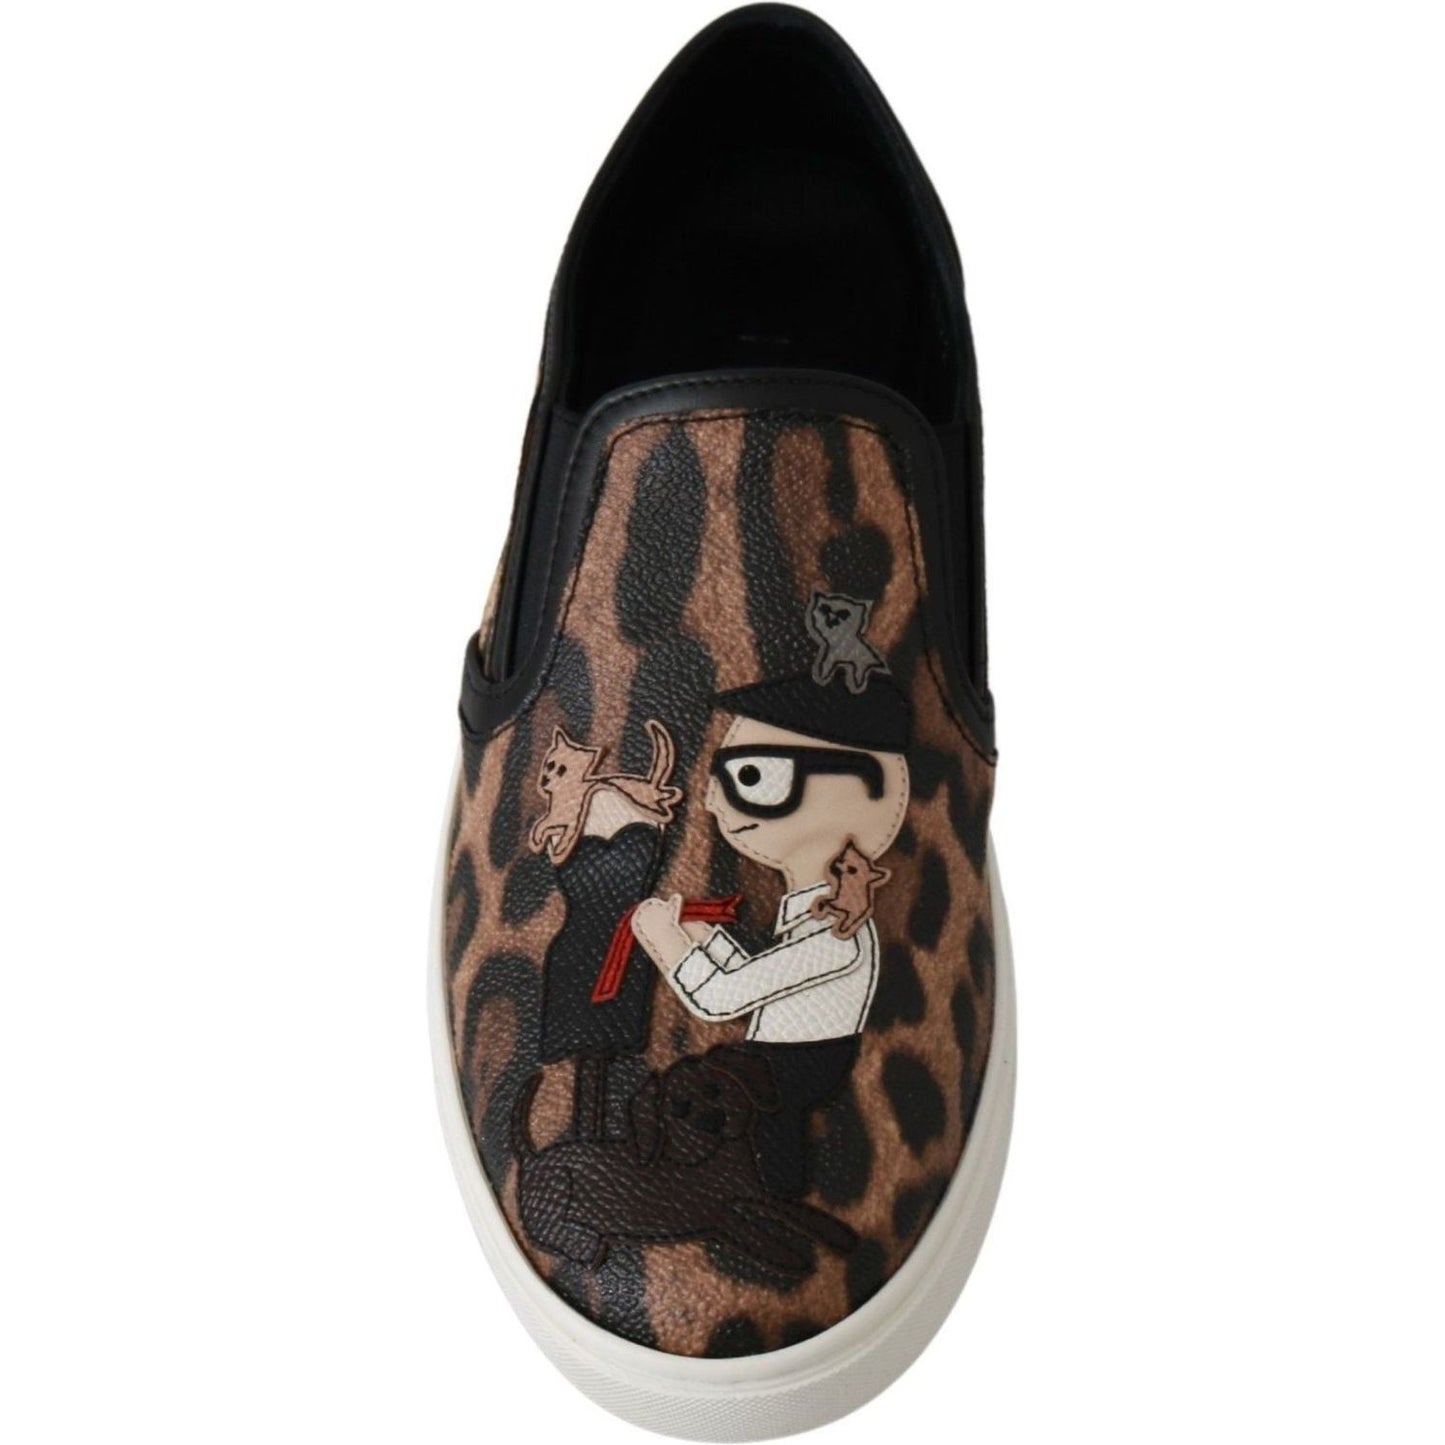 Dolce & Gabbana Chic Leopard Print Loafers for Elegant Comfort leather-leopard-dgfamily-loafers-shoes